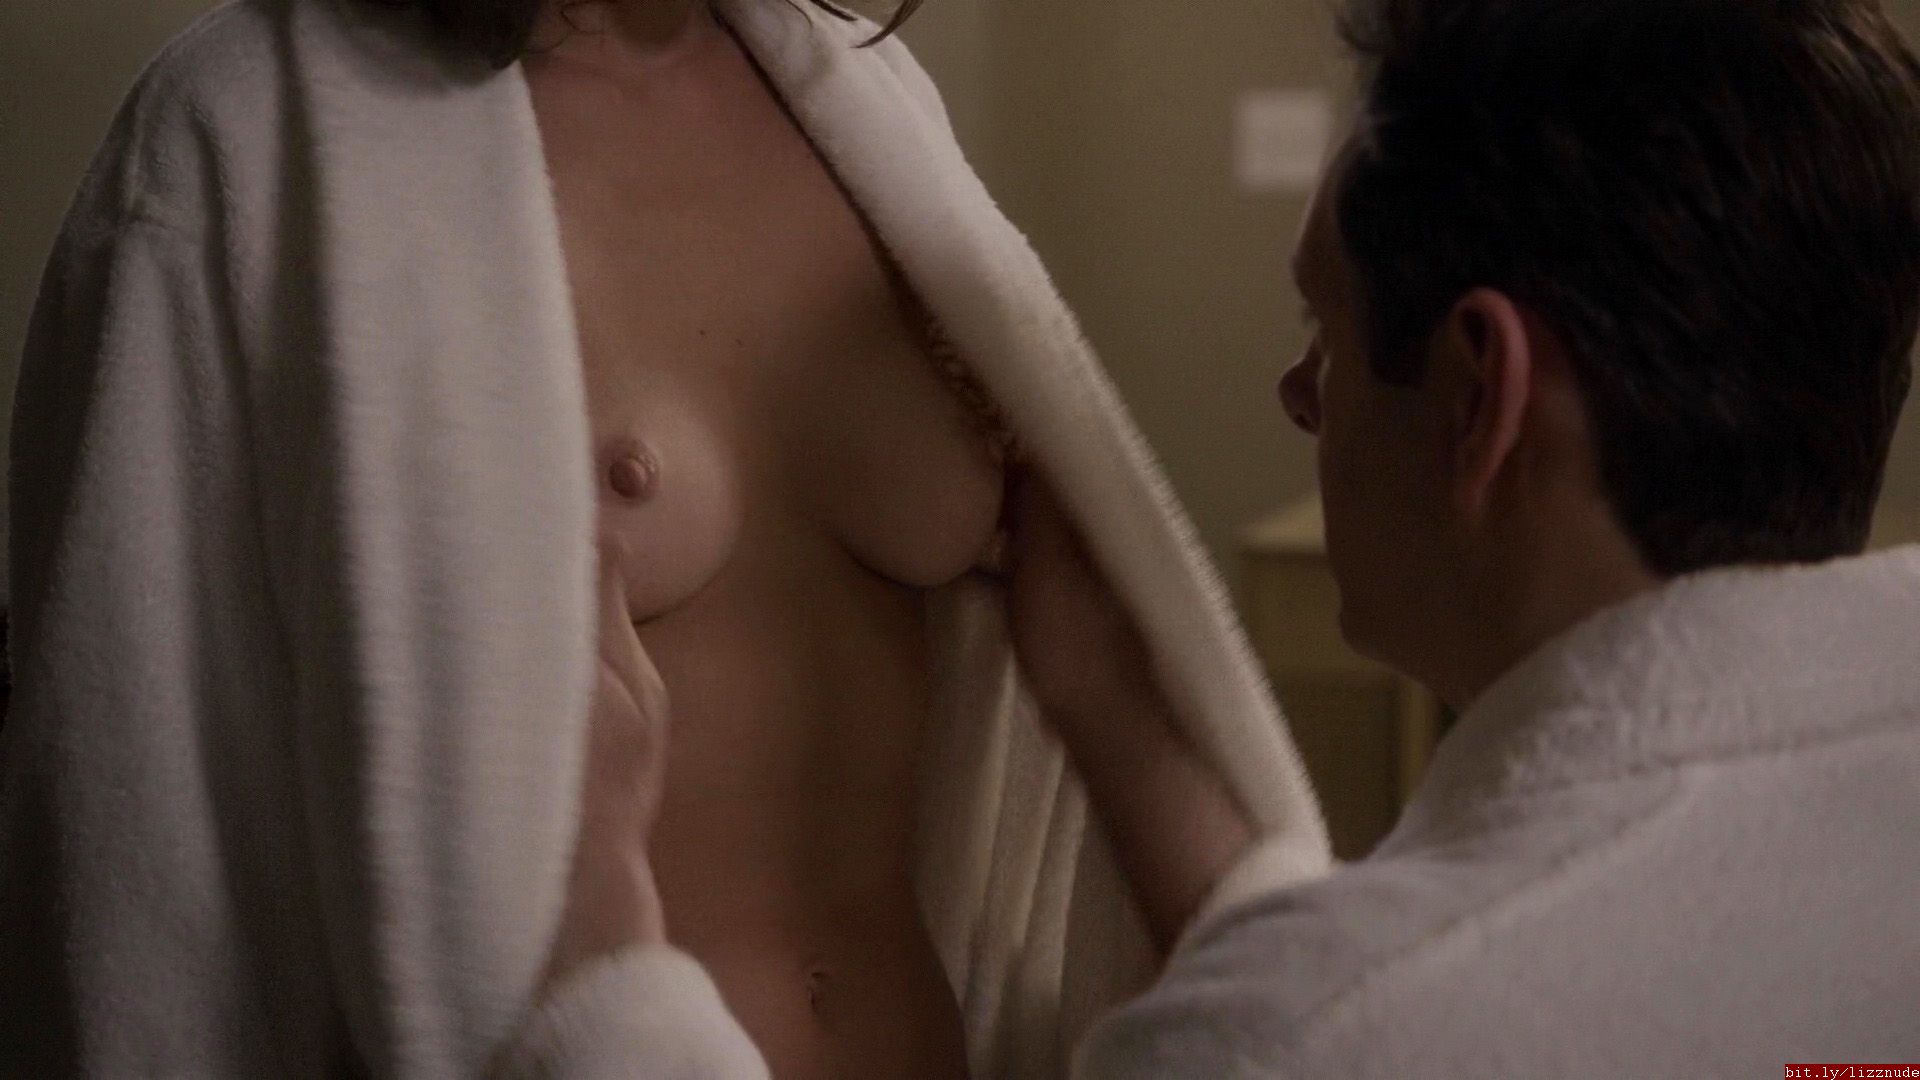 Lizzy Caplan Nudes Leaked Online Will Blow Your Mind 34 Pics